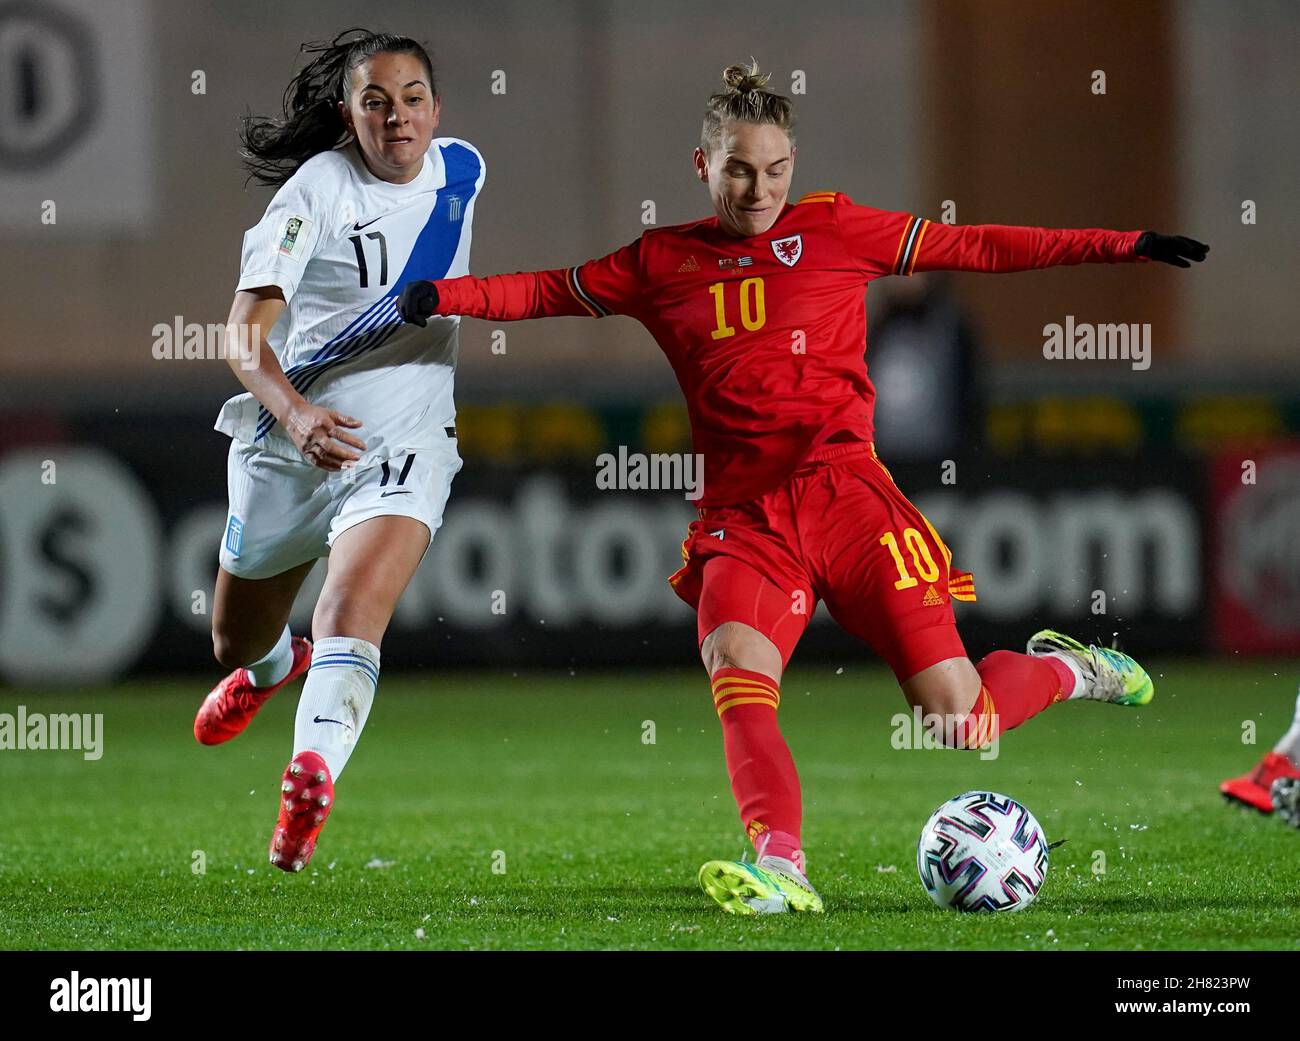 Wales’ Jess Fishlock in action with Greece’s Athanasia Moraitou during the FIFA Women's World Cup 2023 qualifying match at Parc y Scarlets, Llanelli. Picture date: Friday November 26, 2021. See PA story SOCCER Wales Women. Photo credit should read: Nick Potts/PA Wire. RESTRICTIONS: Use subject to restrictions. Editorial use only, no commercial use without prior consent from rights holder. Stock Photo